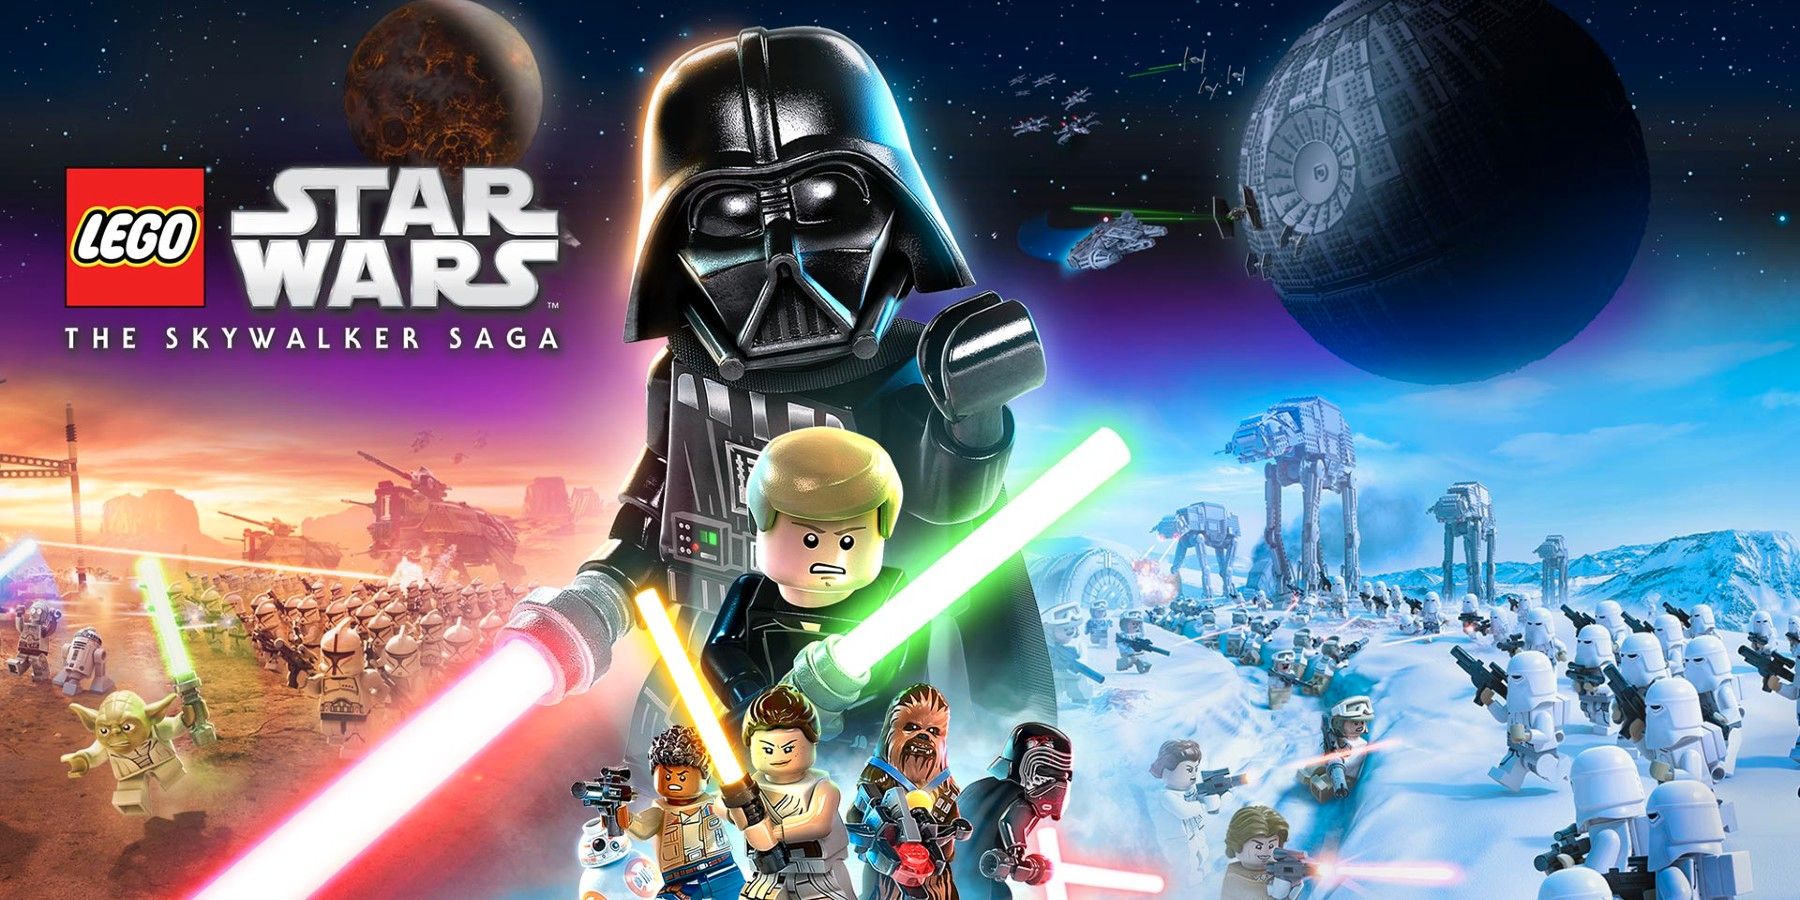 How to Fix LEGO® Star Wars: The Skywalker Saga PC Performance Issues, Lag, Low FPS